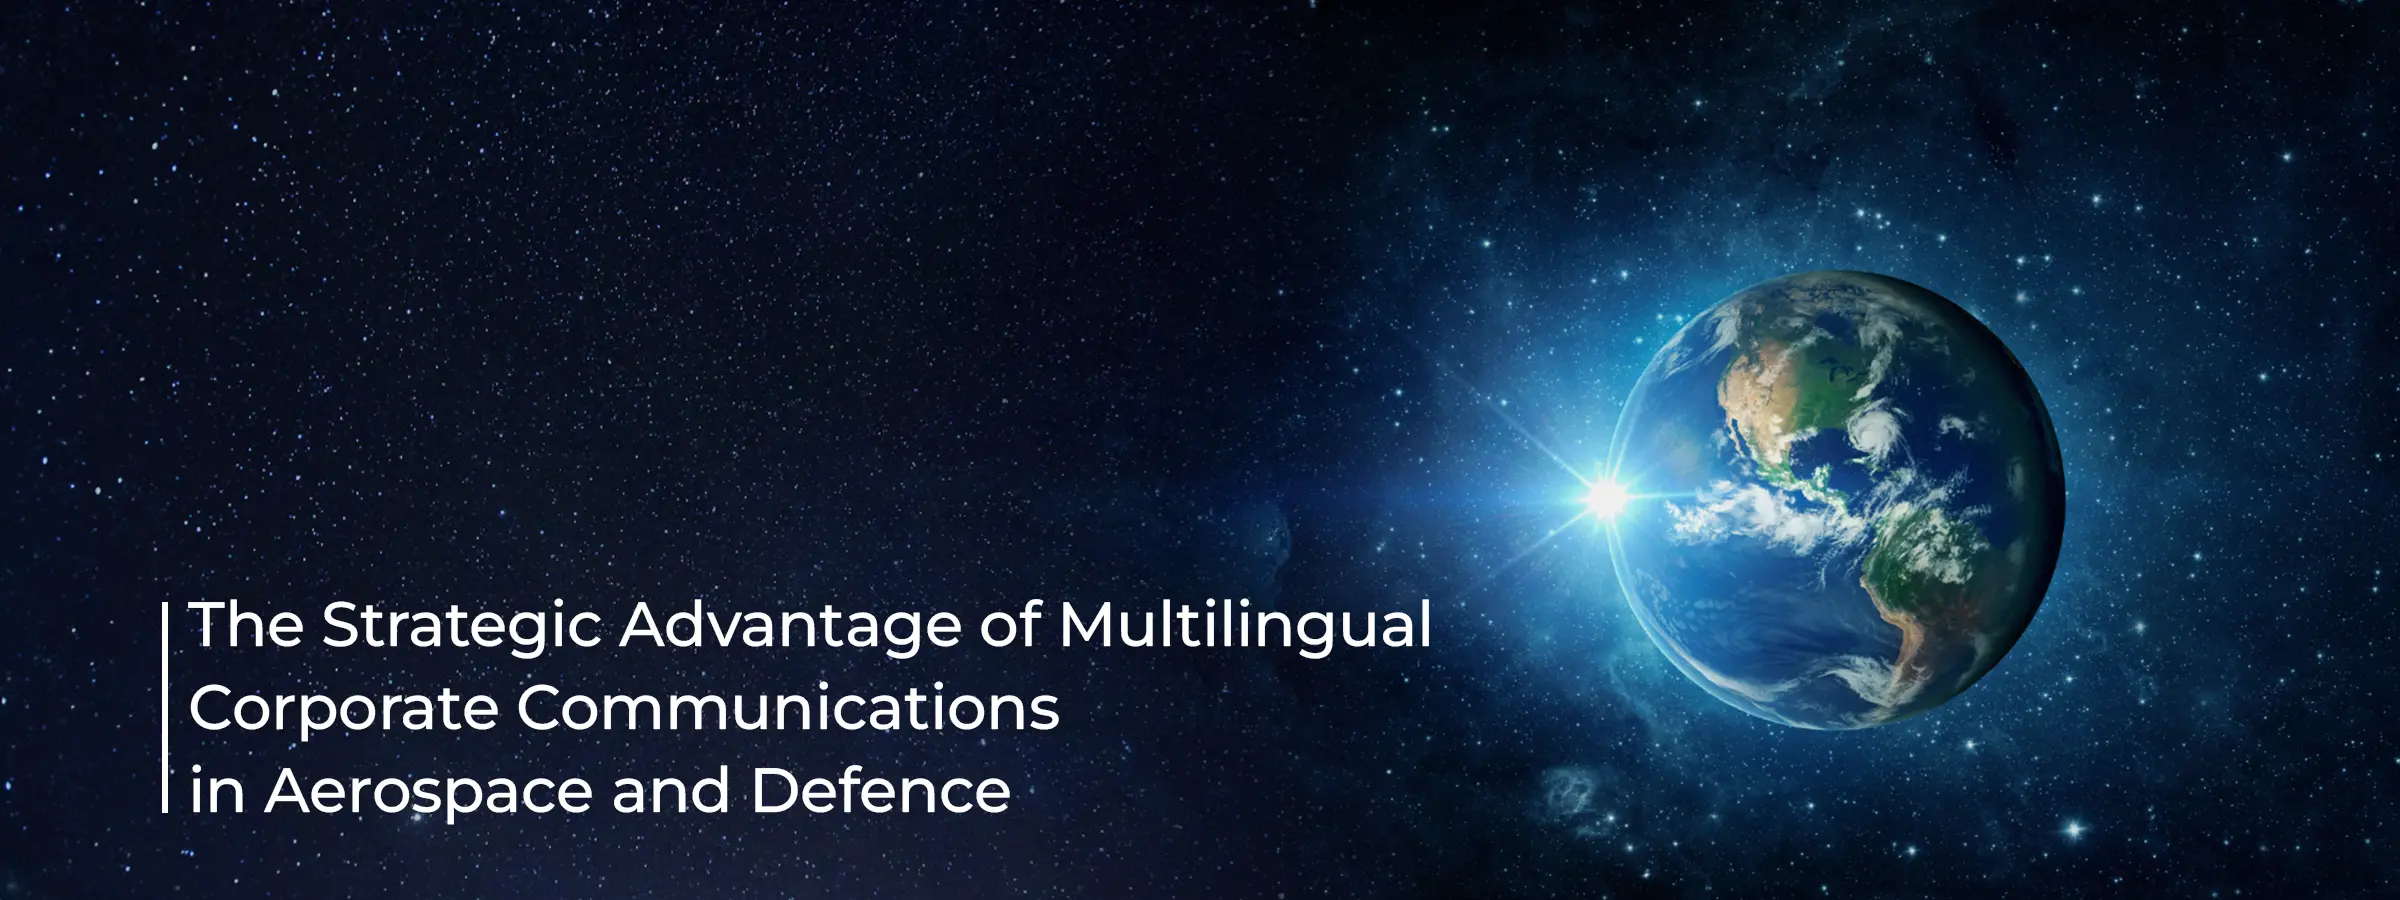 aerospace-and-defense-corporate-communications-industry-blog-banner